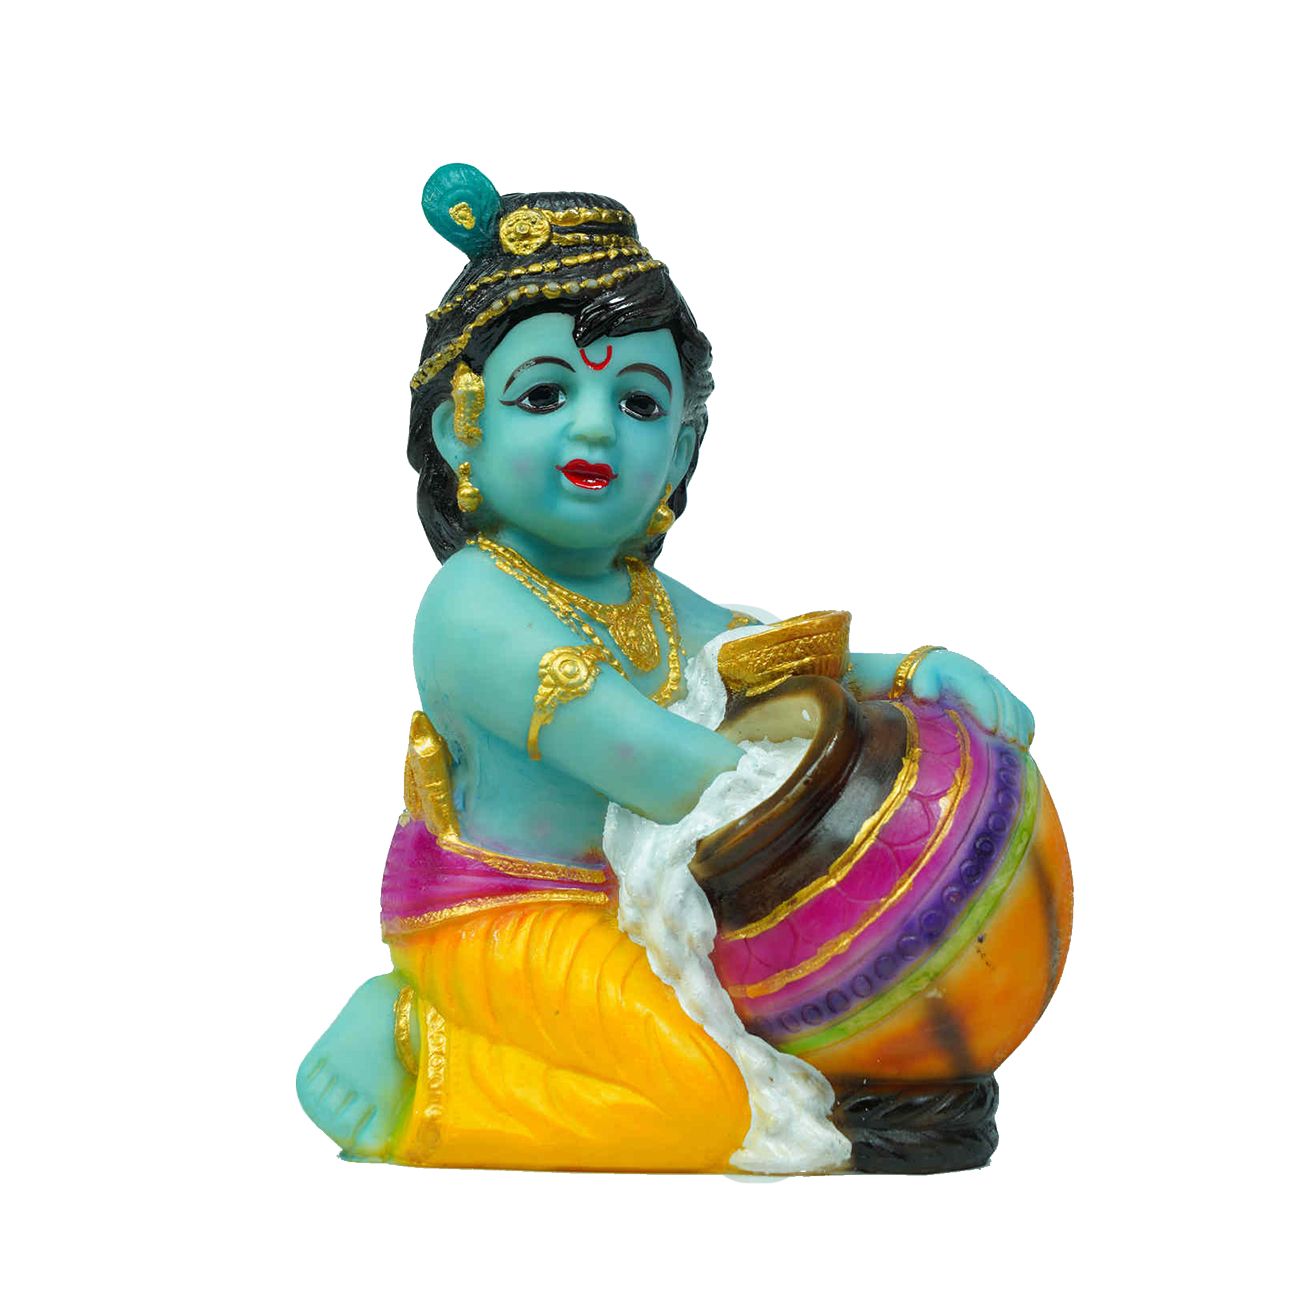 Small krishna idols for your home, pooja room, living room. Buy Now !